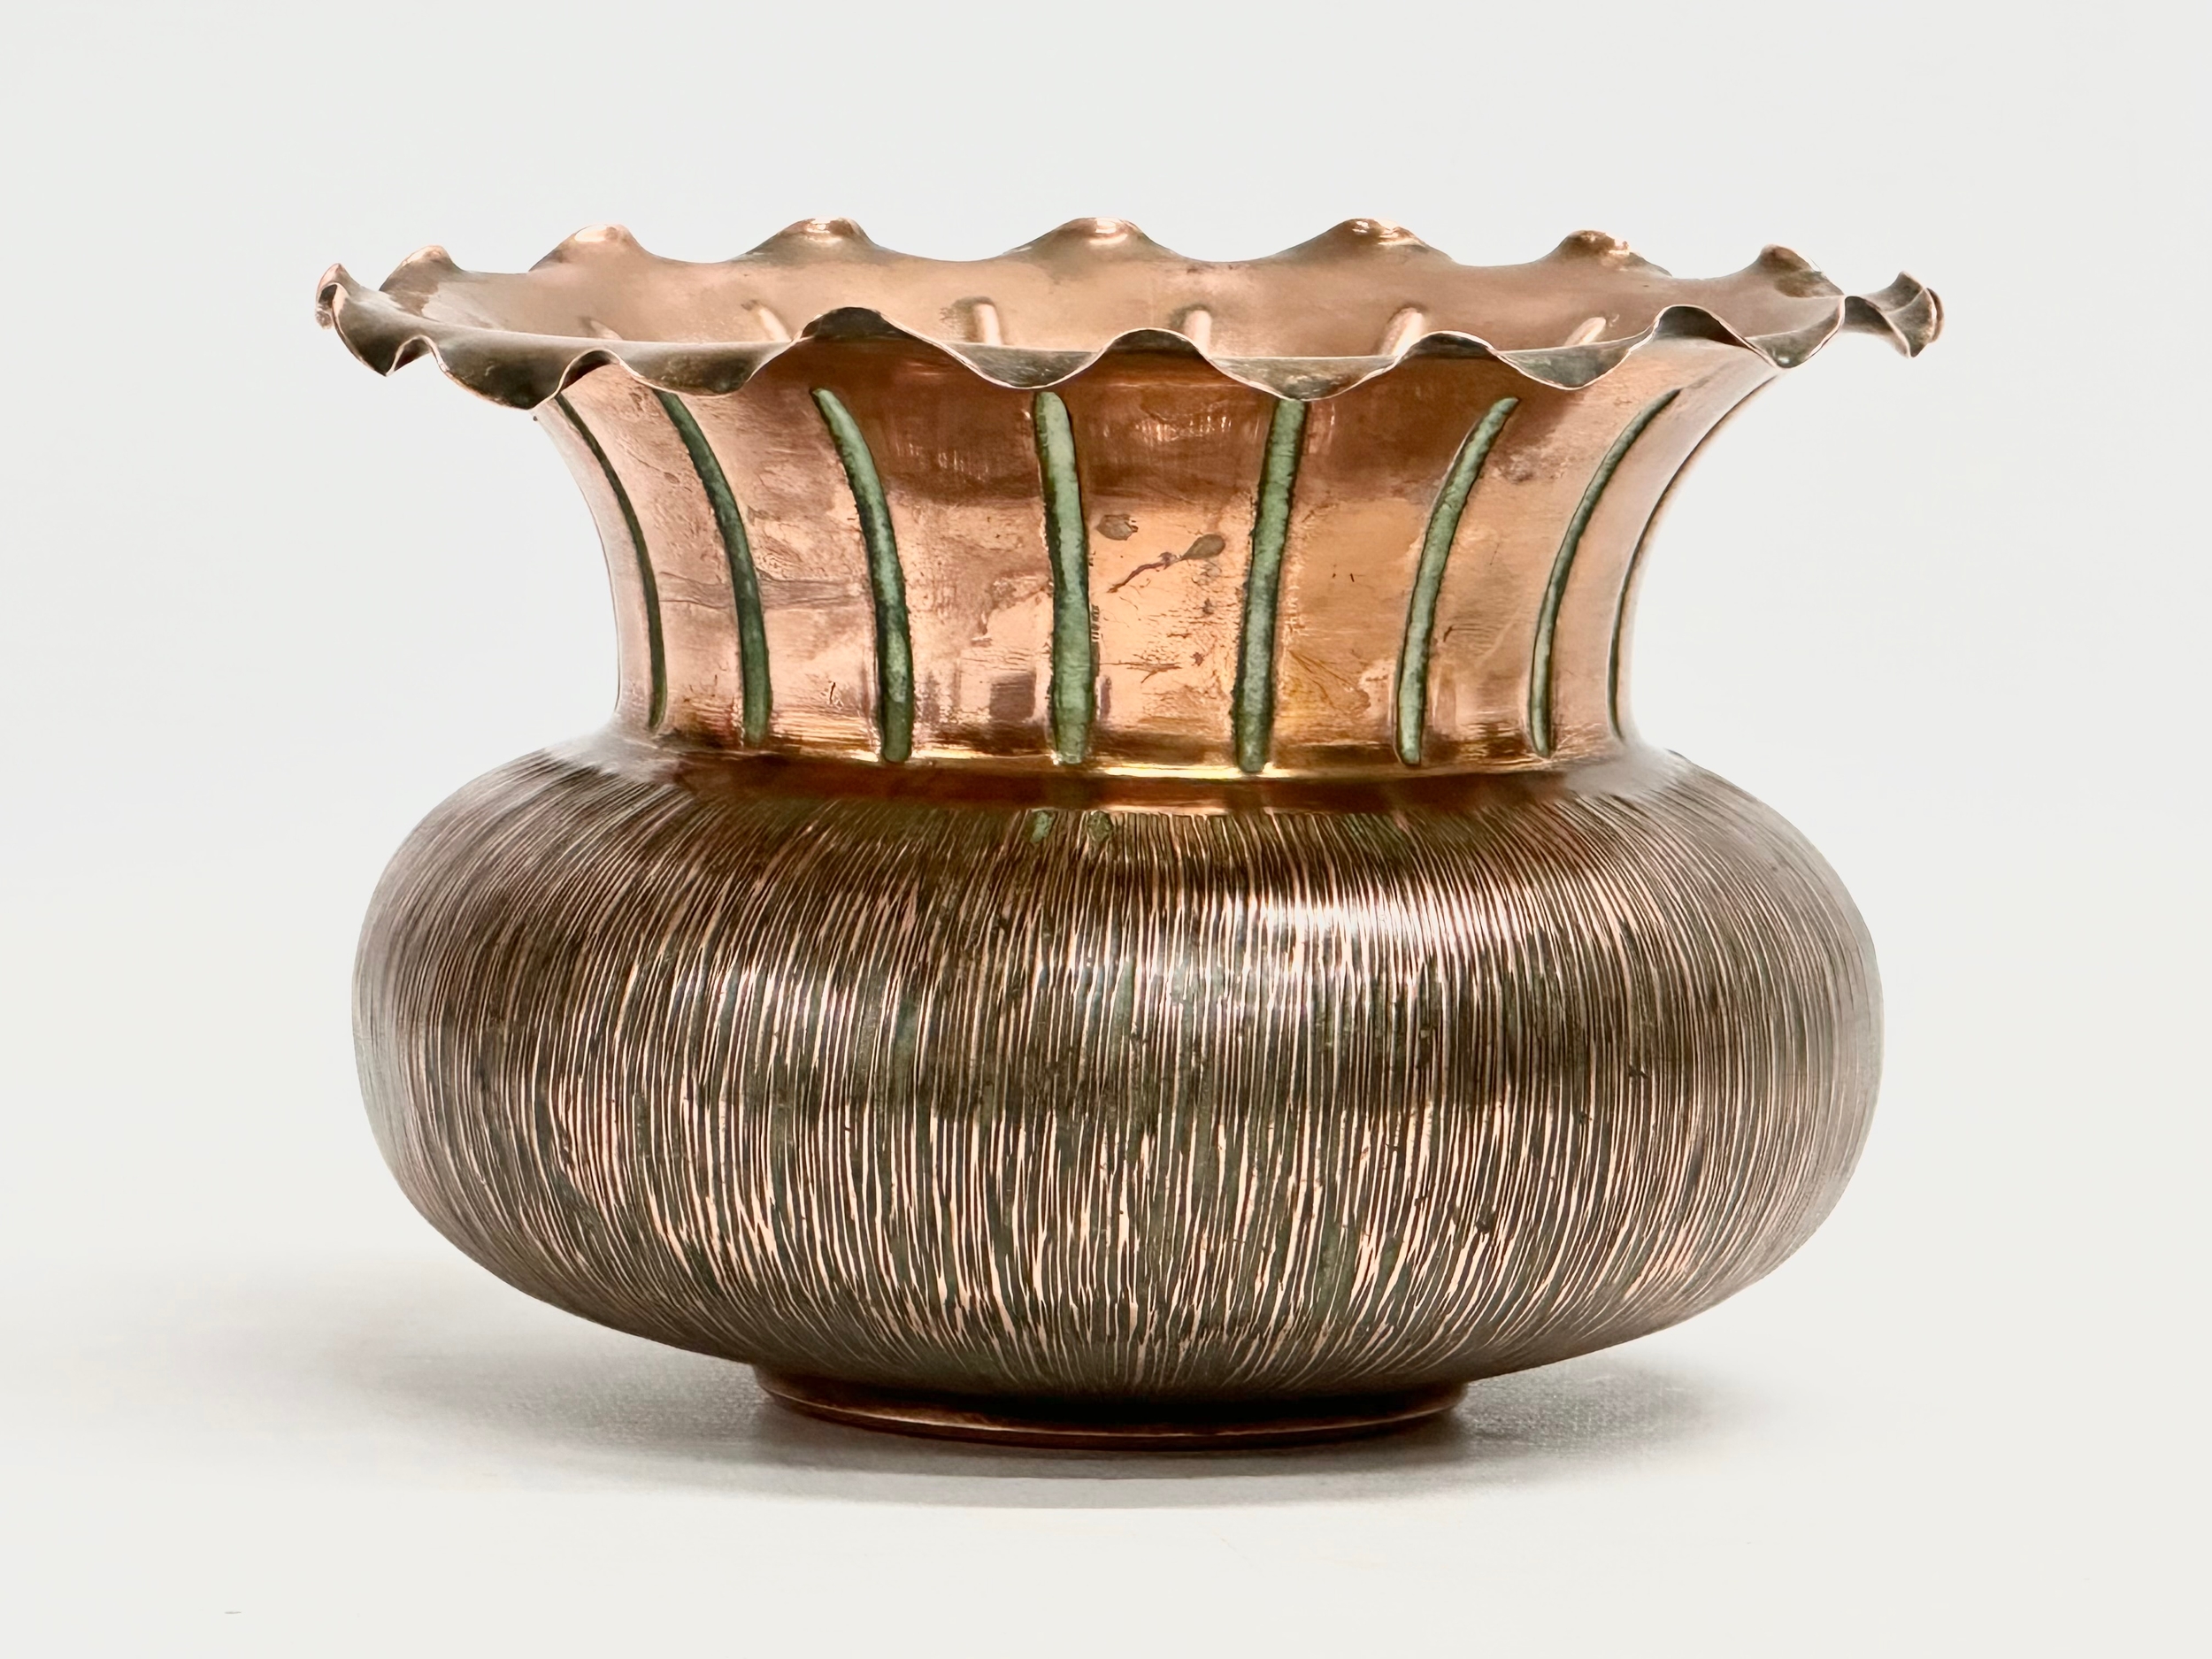 Christopher Dresser. An early 20th century copper jardiniere designed by Christopher Dresser for